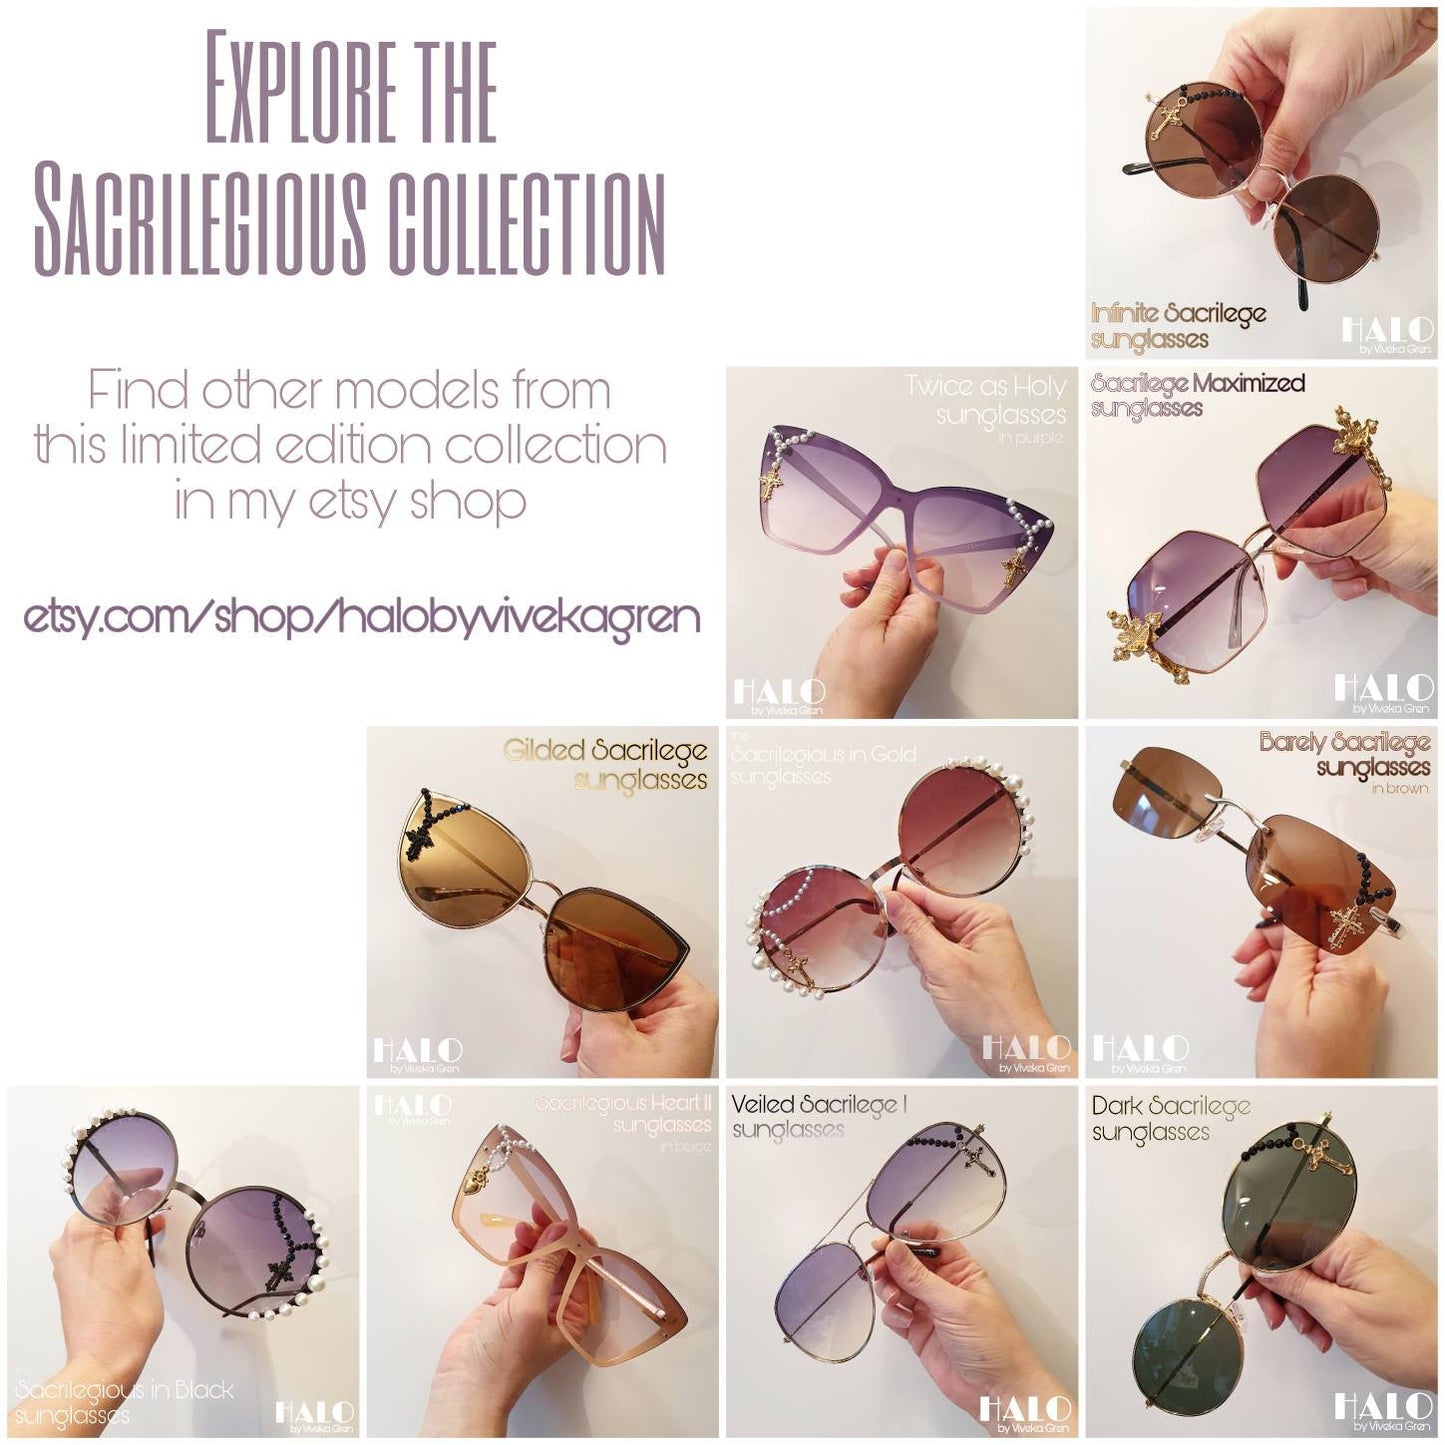 Sacrilegious collection: The Pearls of Sacrilege I sunglasses (three colour variations) limited edition